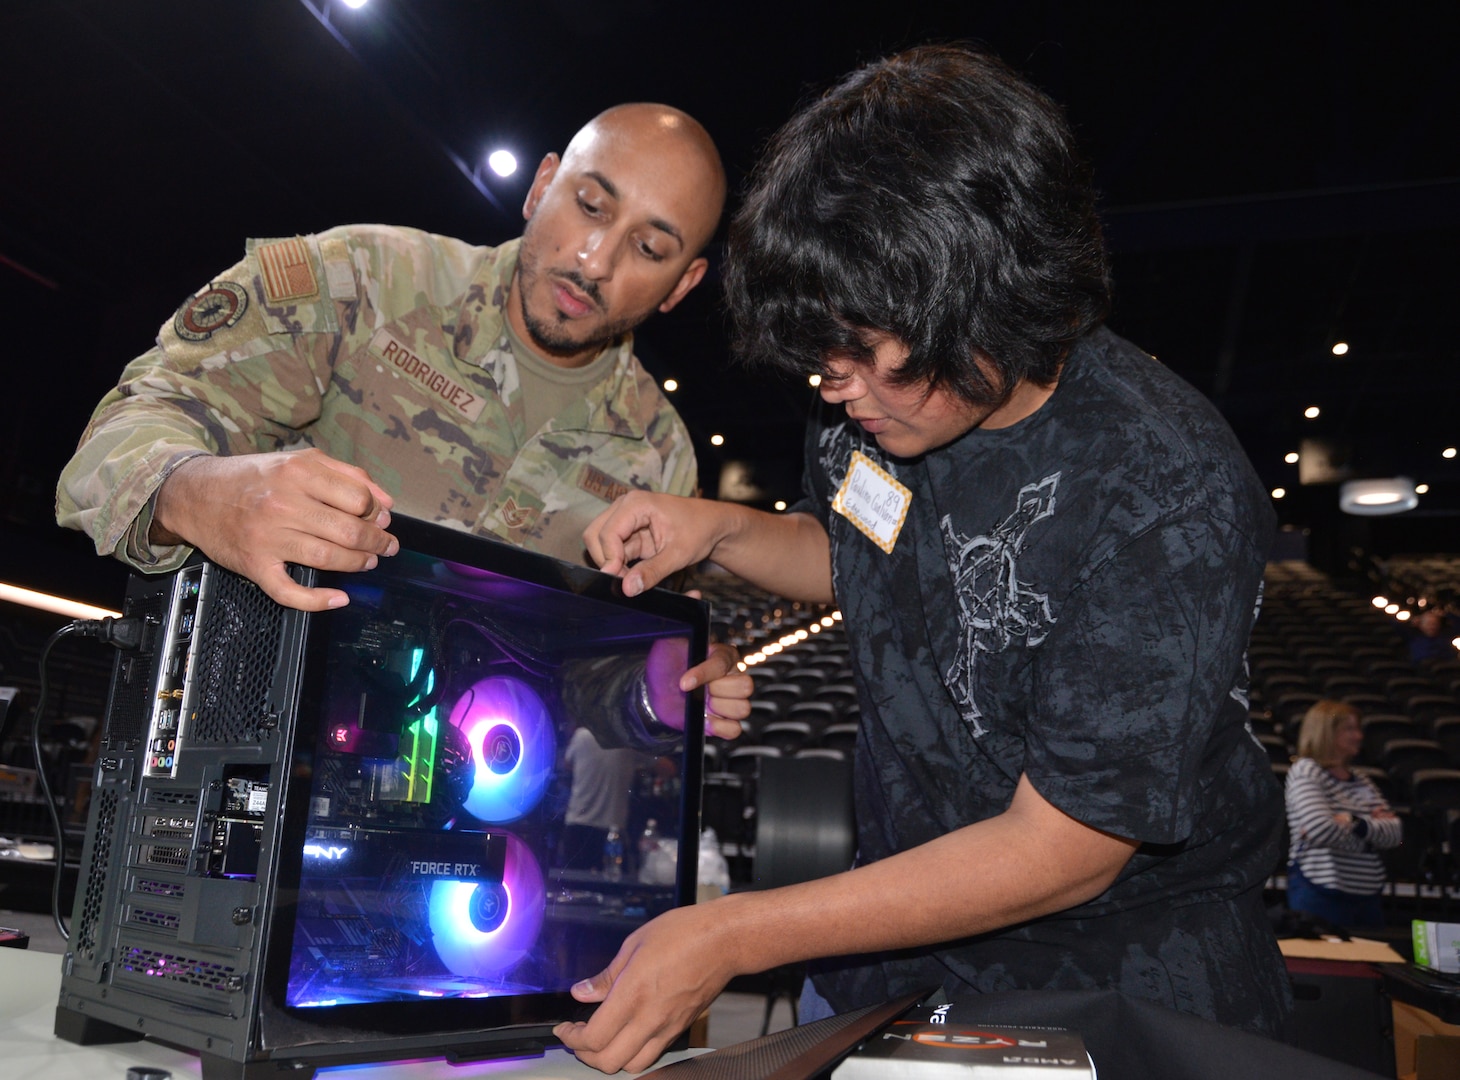 Tech. Sgt. Jose Rodriguez, 690th Cyberspace Control Squadron Future Operations non-commissioned officer in charge, helps Paulino Galvan from Edgewood High School, attach outer cover during the ‘Build Your Future’ event, April 29, 2023, at Tech Port Arena, San Antonio, Texas. Airmen used their military and personal computer expertise to assist students, grades 8-12, build liquid cooled computers valued more than $2,000. The students were allowed to take them home after completion.